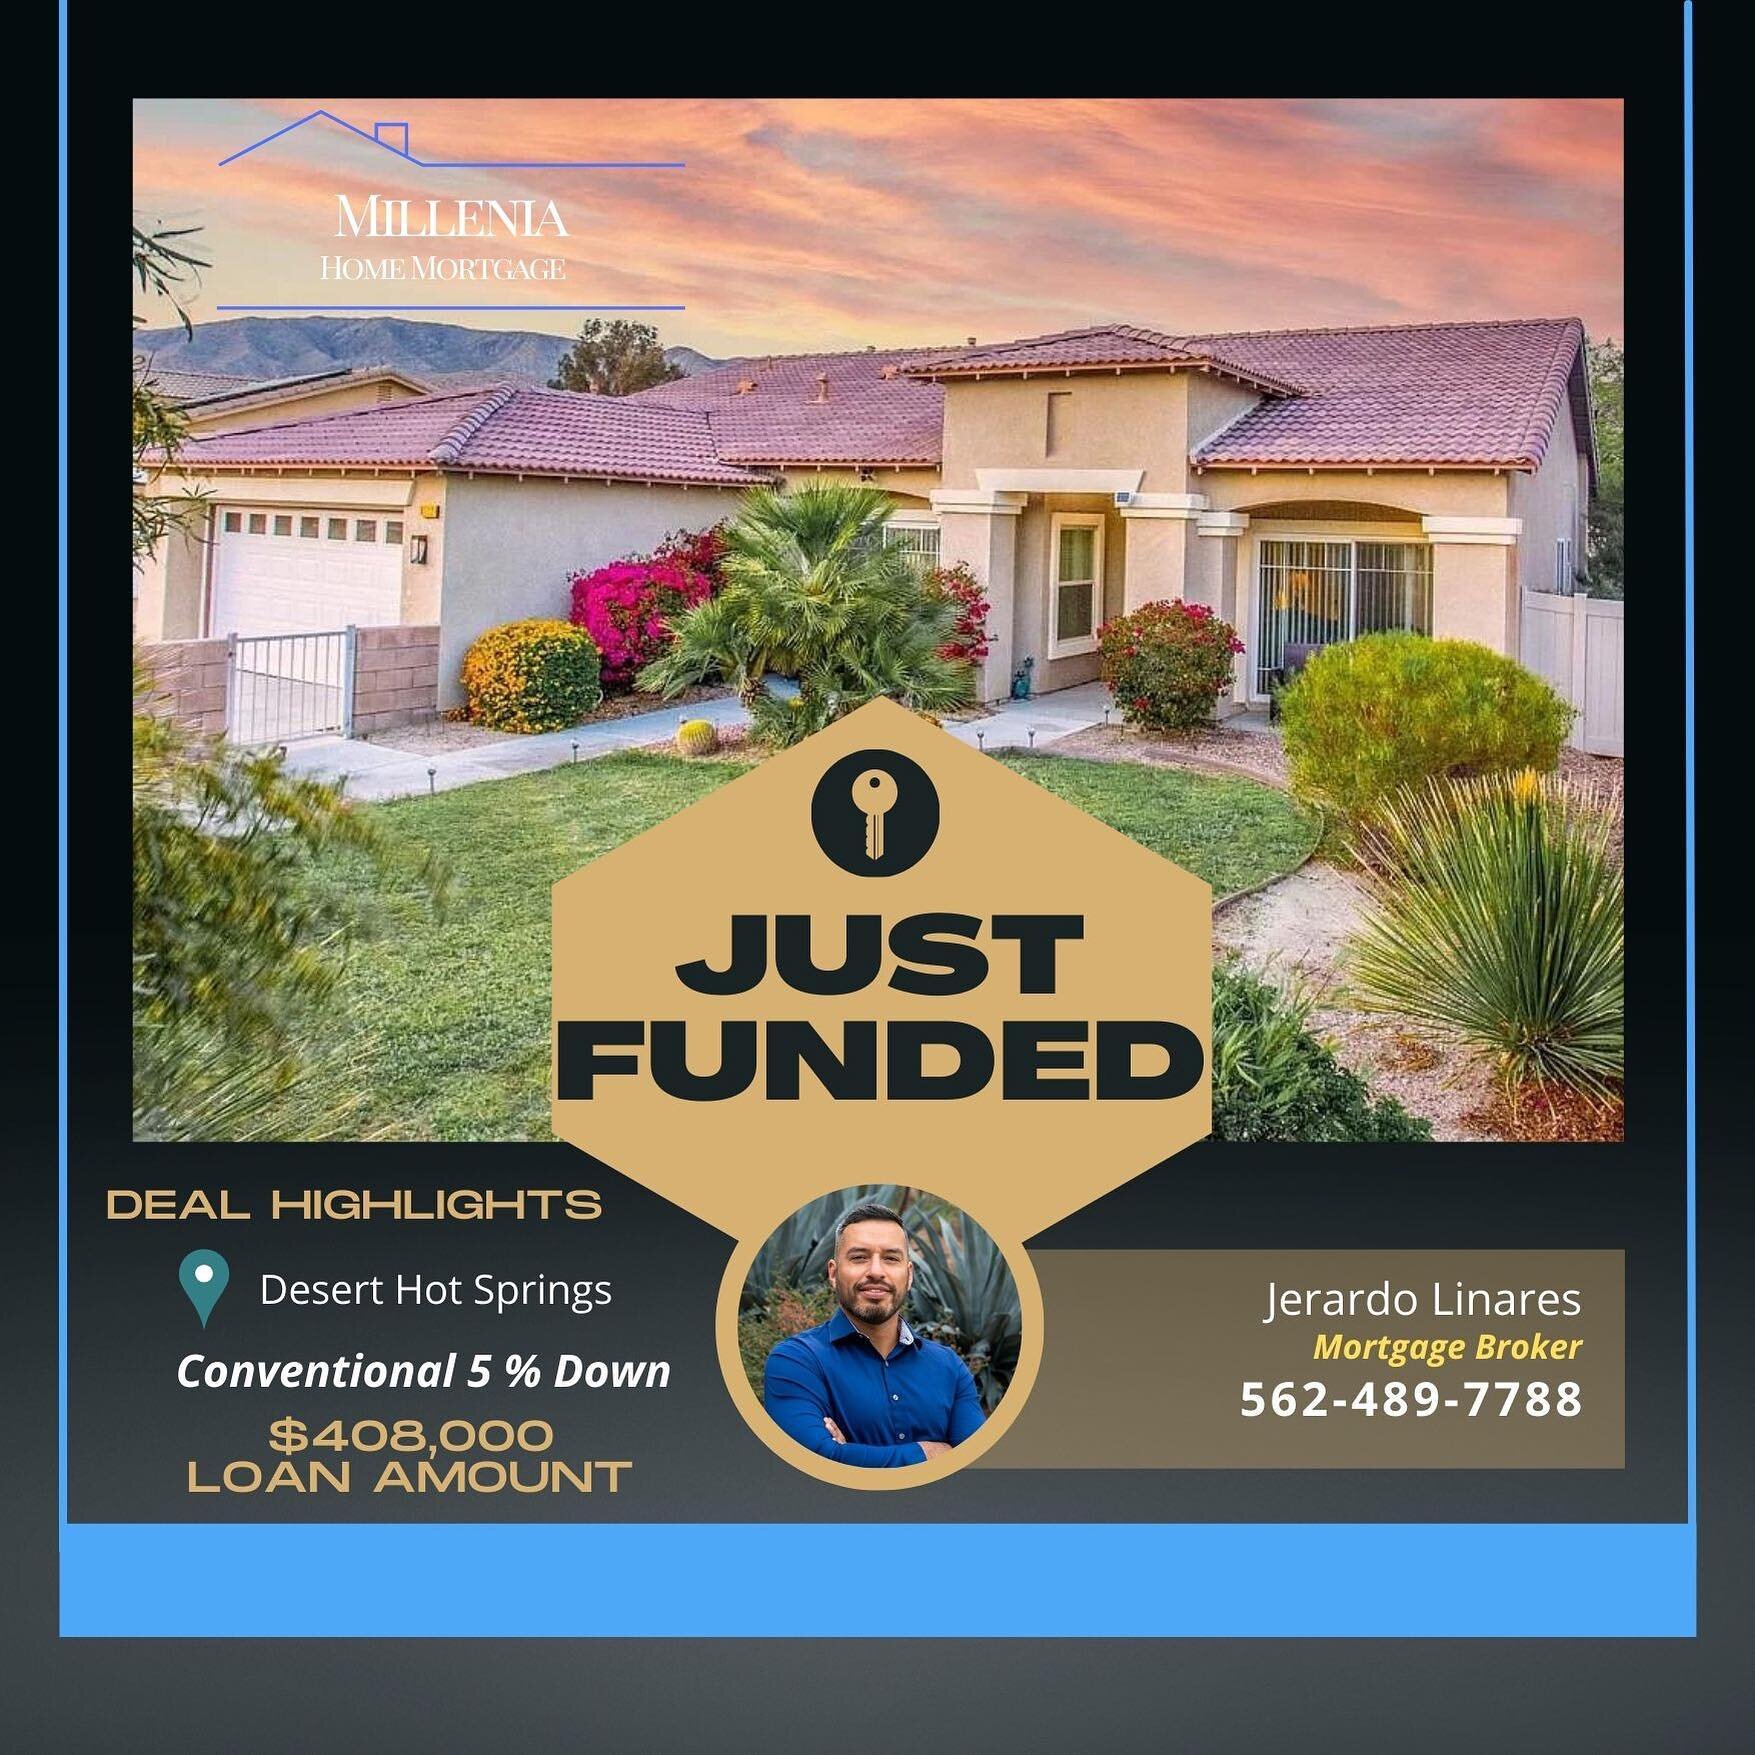 Believe it or not you can still find SFRs under 500k in So Cal! Just helped a VIP client of ours with their home loan for this Desert Hot Springs Home 🏡 🏜️ 🌵